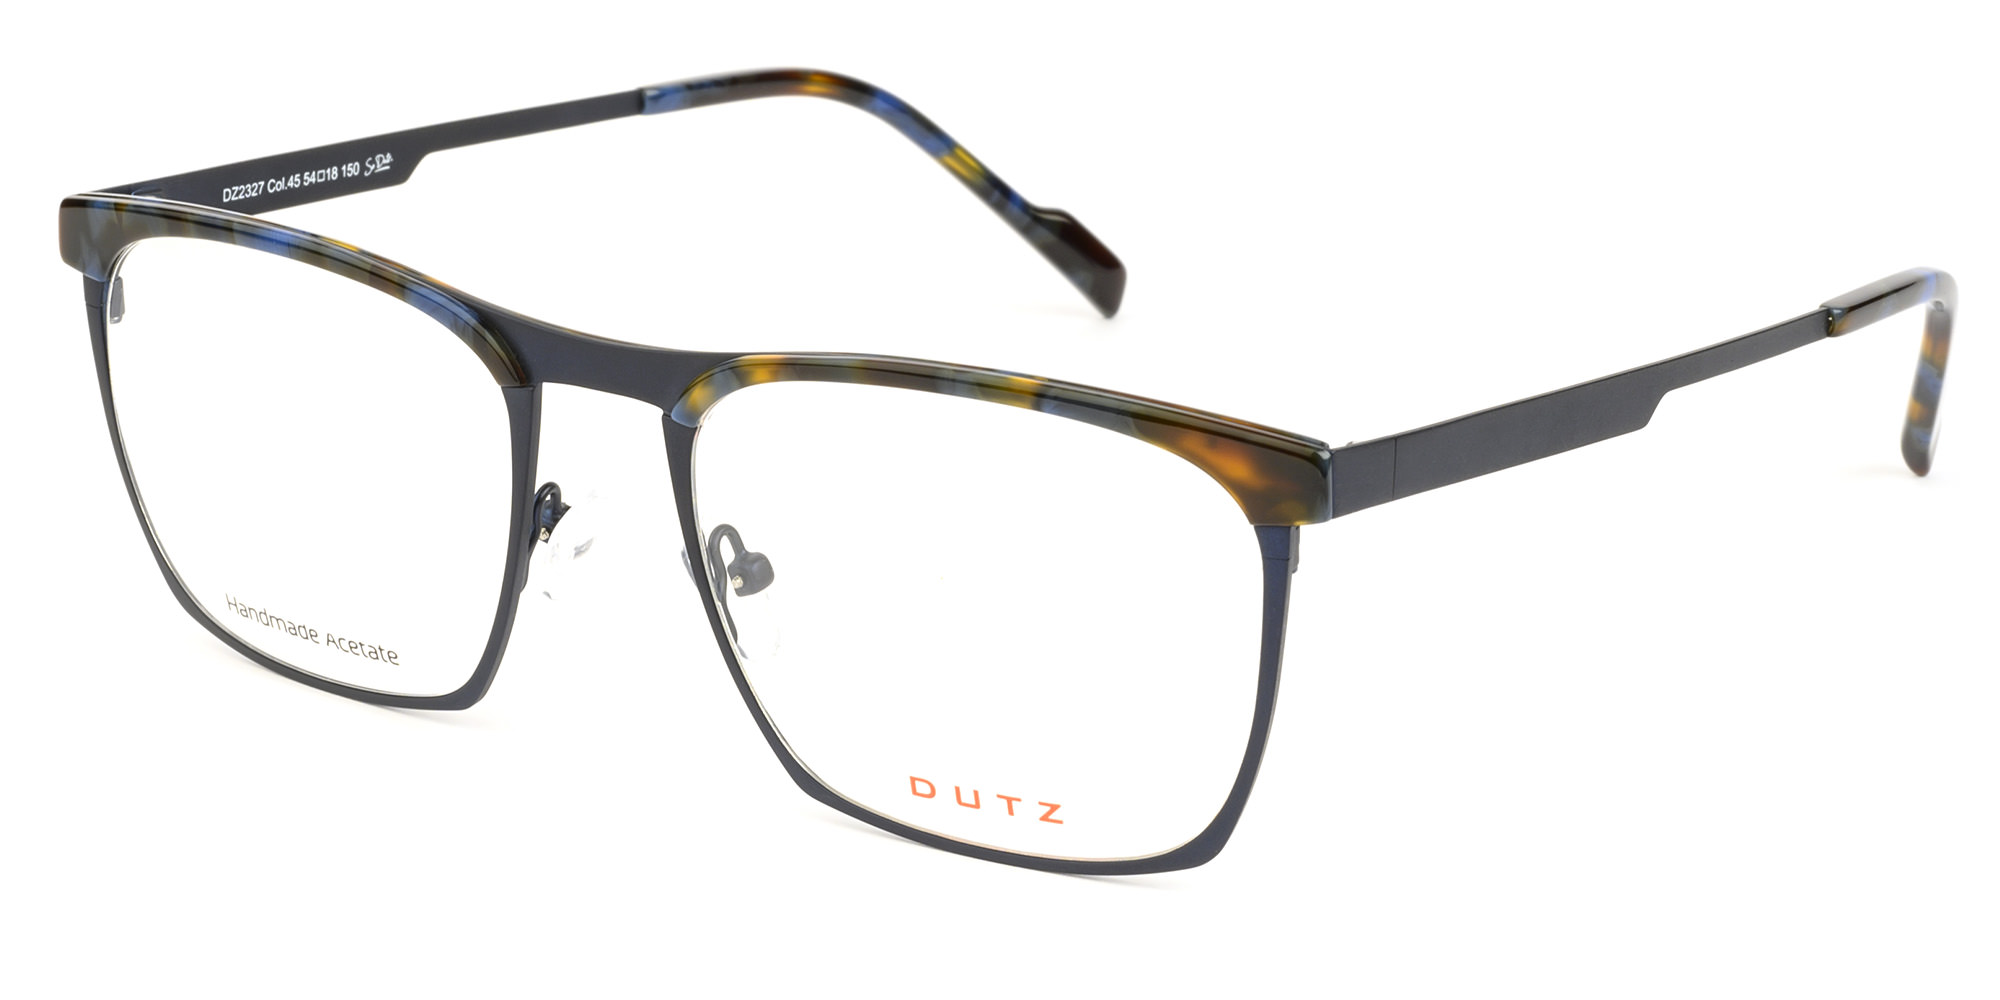 Dark blue metallic frame and temples, combined with matching multicolor, acetate top front and assorted temple tips